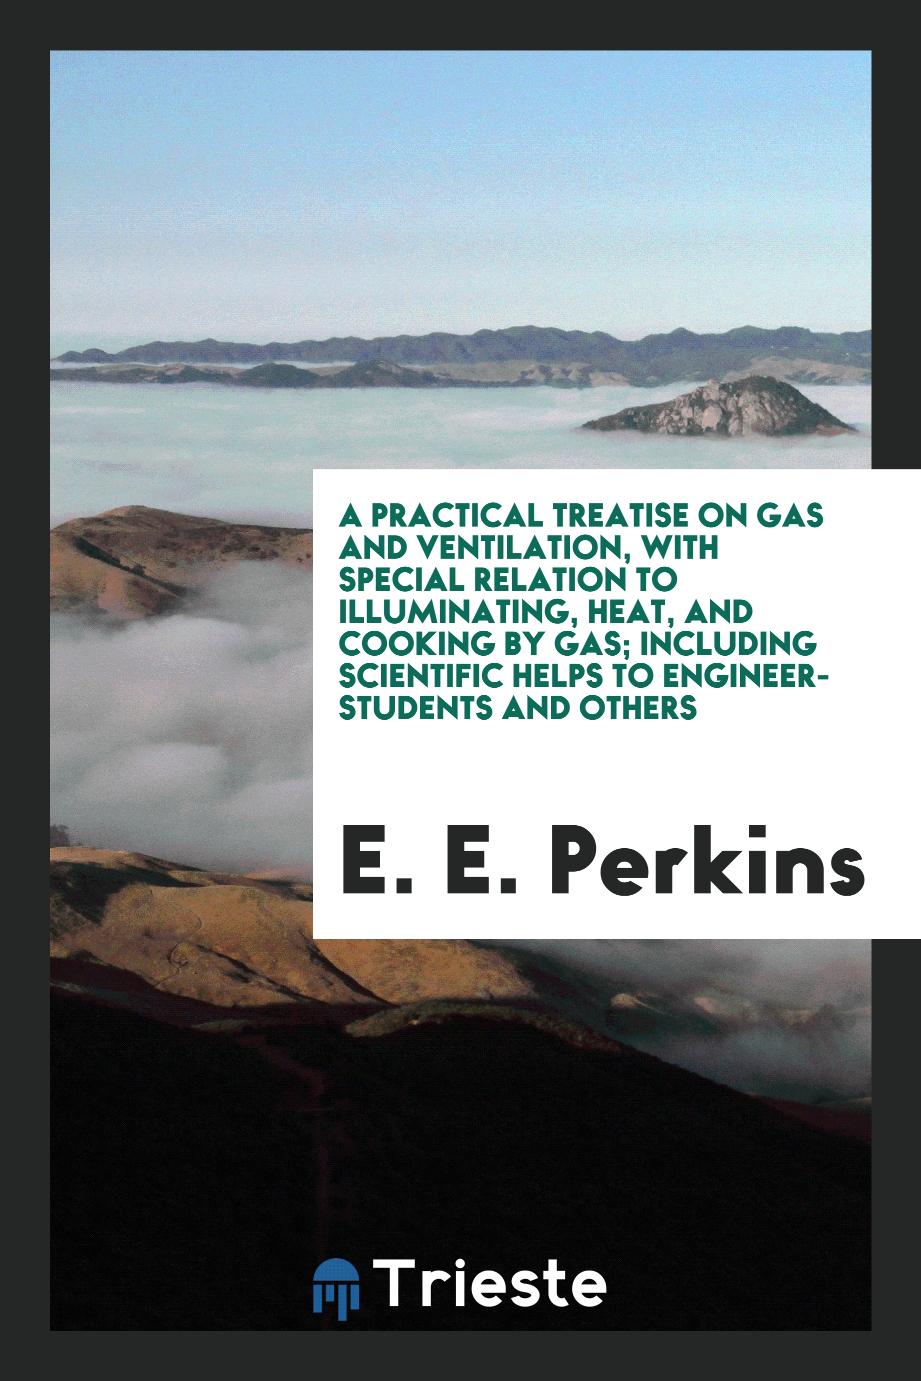 A practical treatise on gas and ventilation, with special relation to illuminating, heat, and cooking by gas; including scientific helps to engineer-students and others